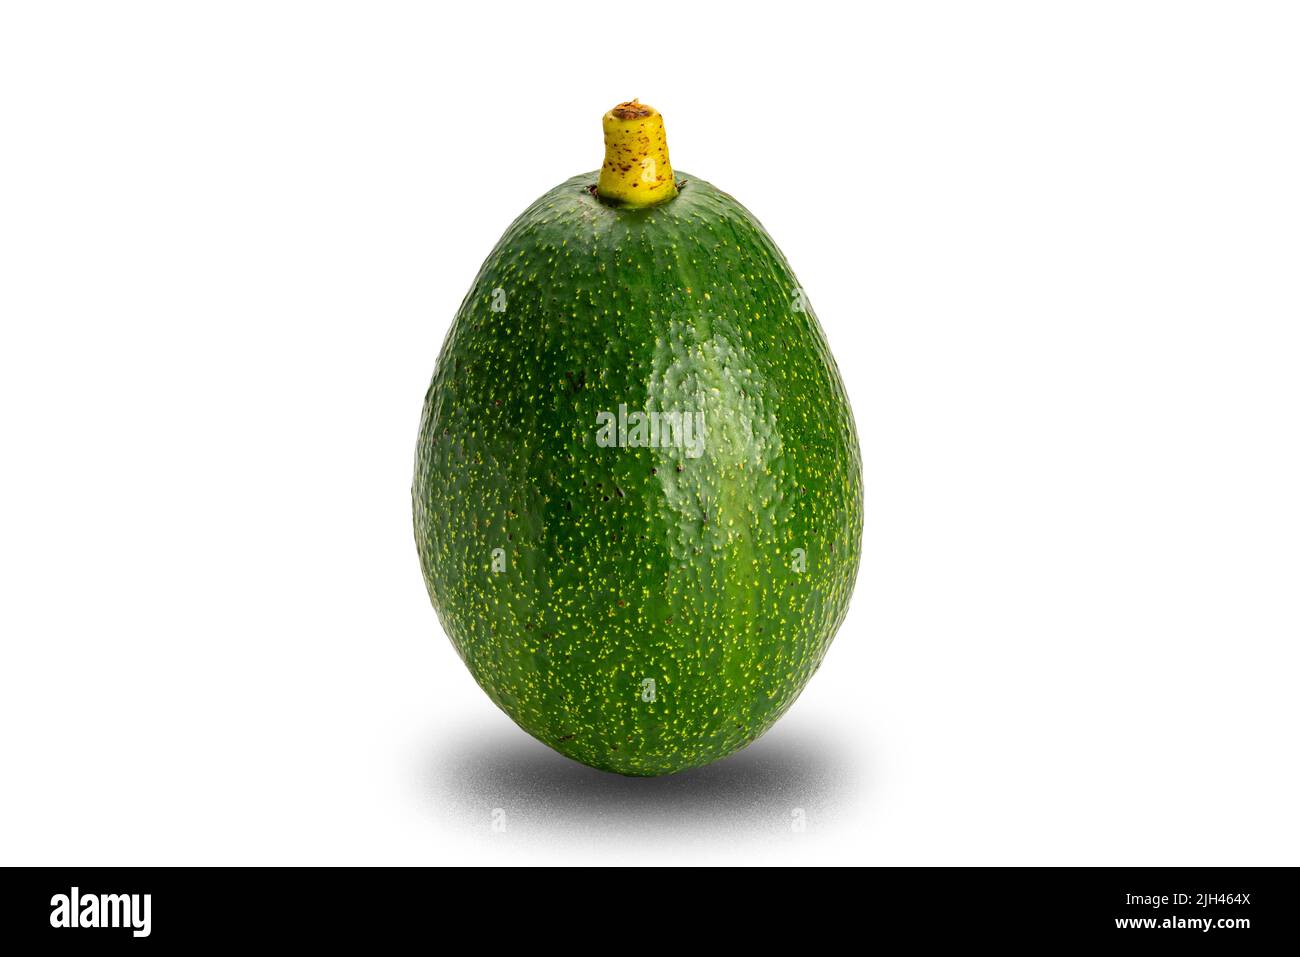 Single green fresh avocado with stalk isolated on white background with clipping path. Stock Photo